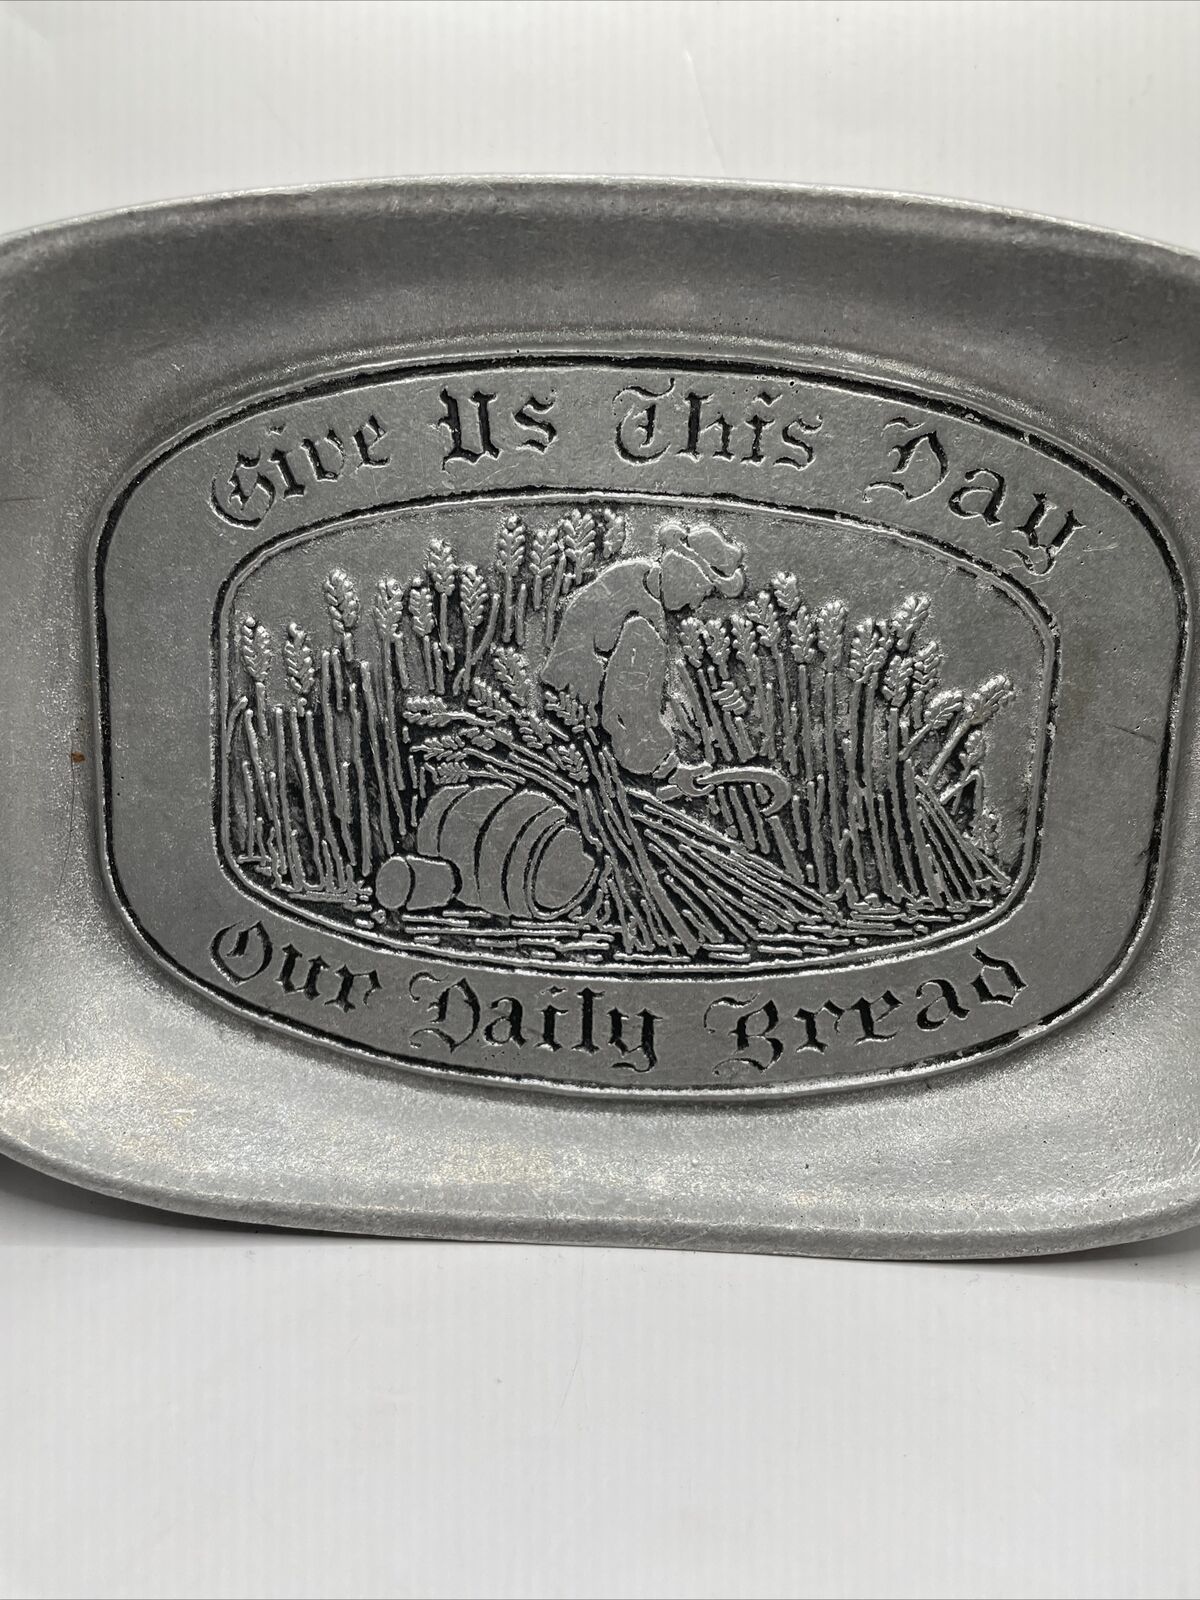 Wilton Pewter Style Bread Plate “Give Us This Day Our Daily Bread” VTG